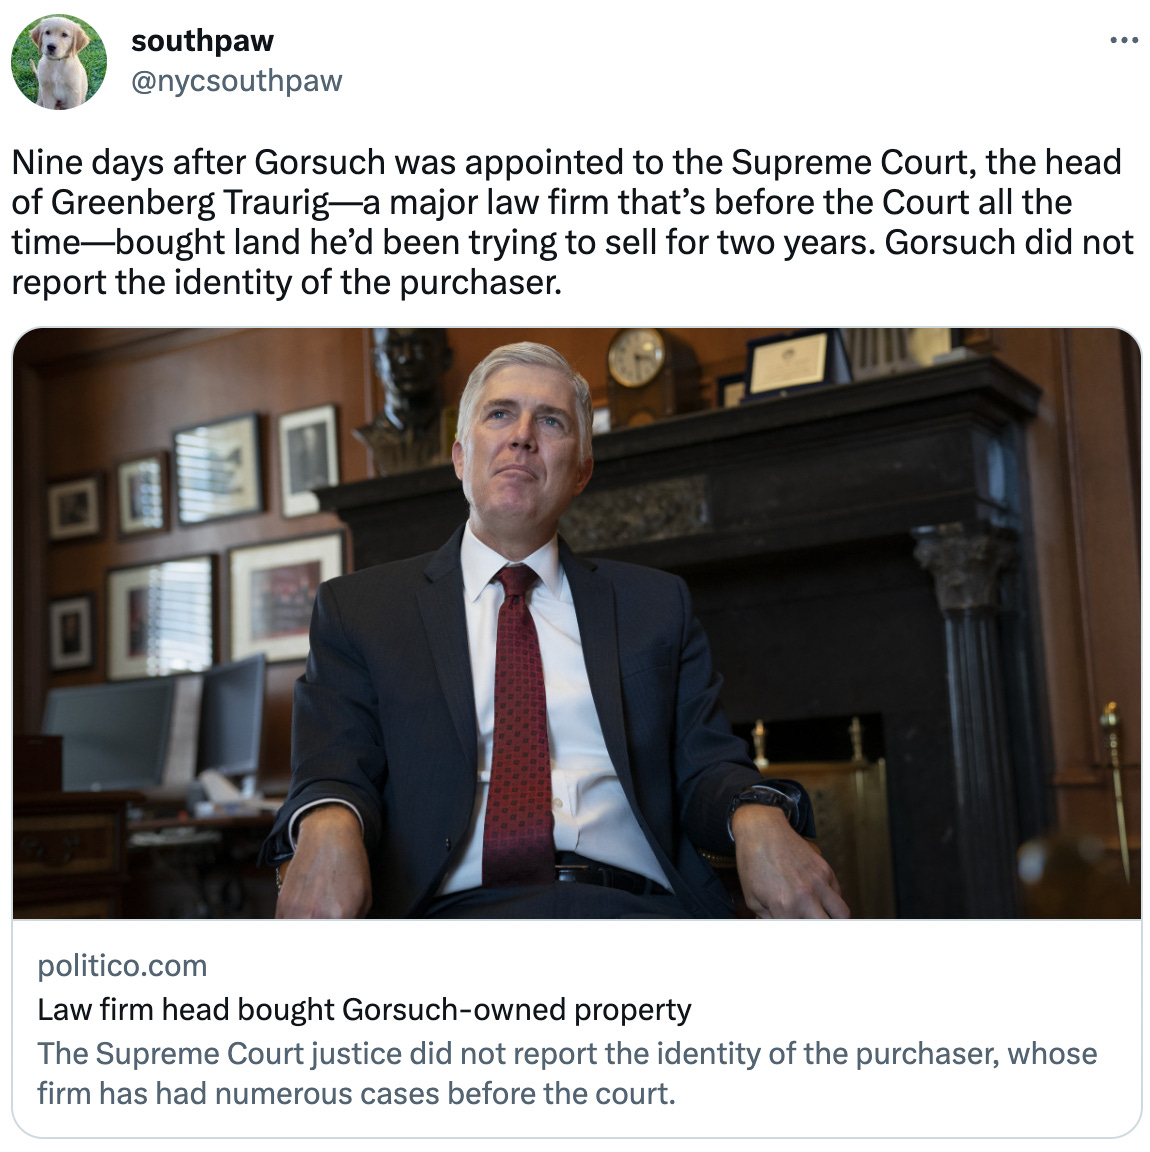  southpaw @nycsouthpaw Nine days after Gorsuch was appointed to the Supreme Court, the head of Greenberg Traurig—a major law firm that’s before the Court all the time—bought land he’d been trying to sell for two years. Gorsuch did not report the identity of the purchaser. politico.com Law firm head bought Gorsuch-owned property The Supreme Court justice did not report the identity of the purchaser, whose firm has had numerous cases before the court.